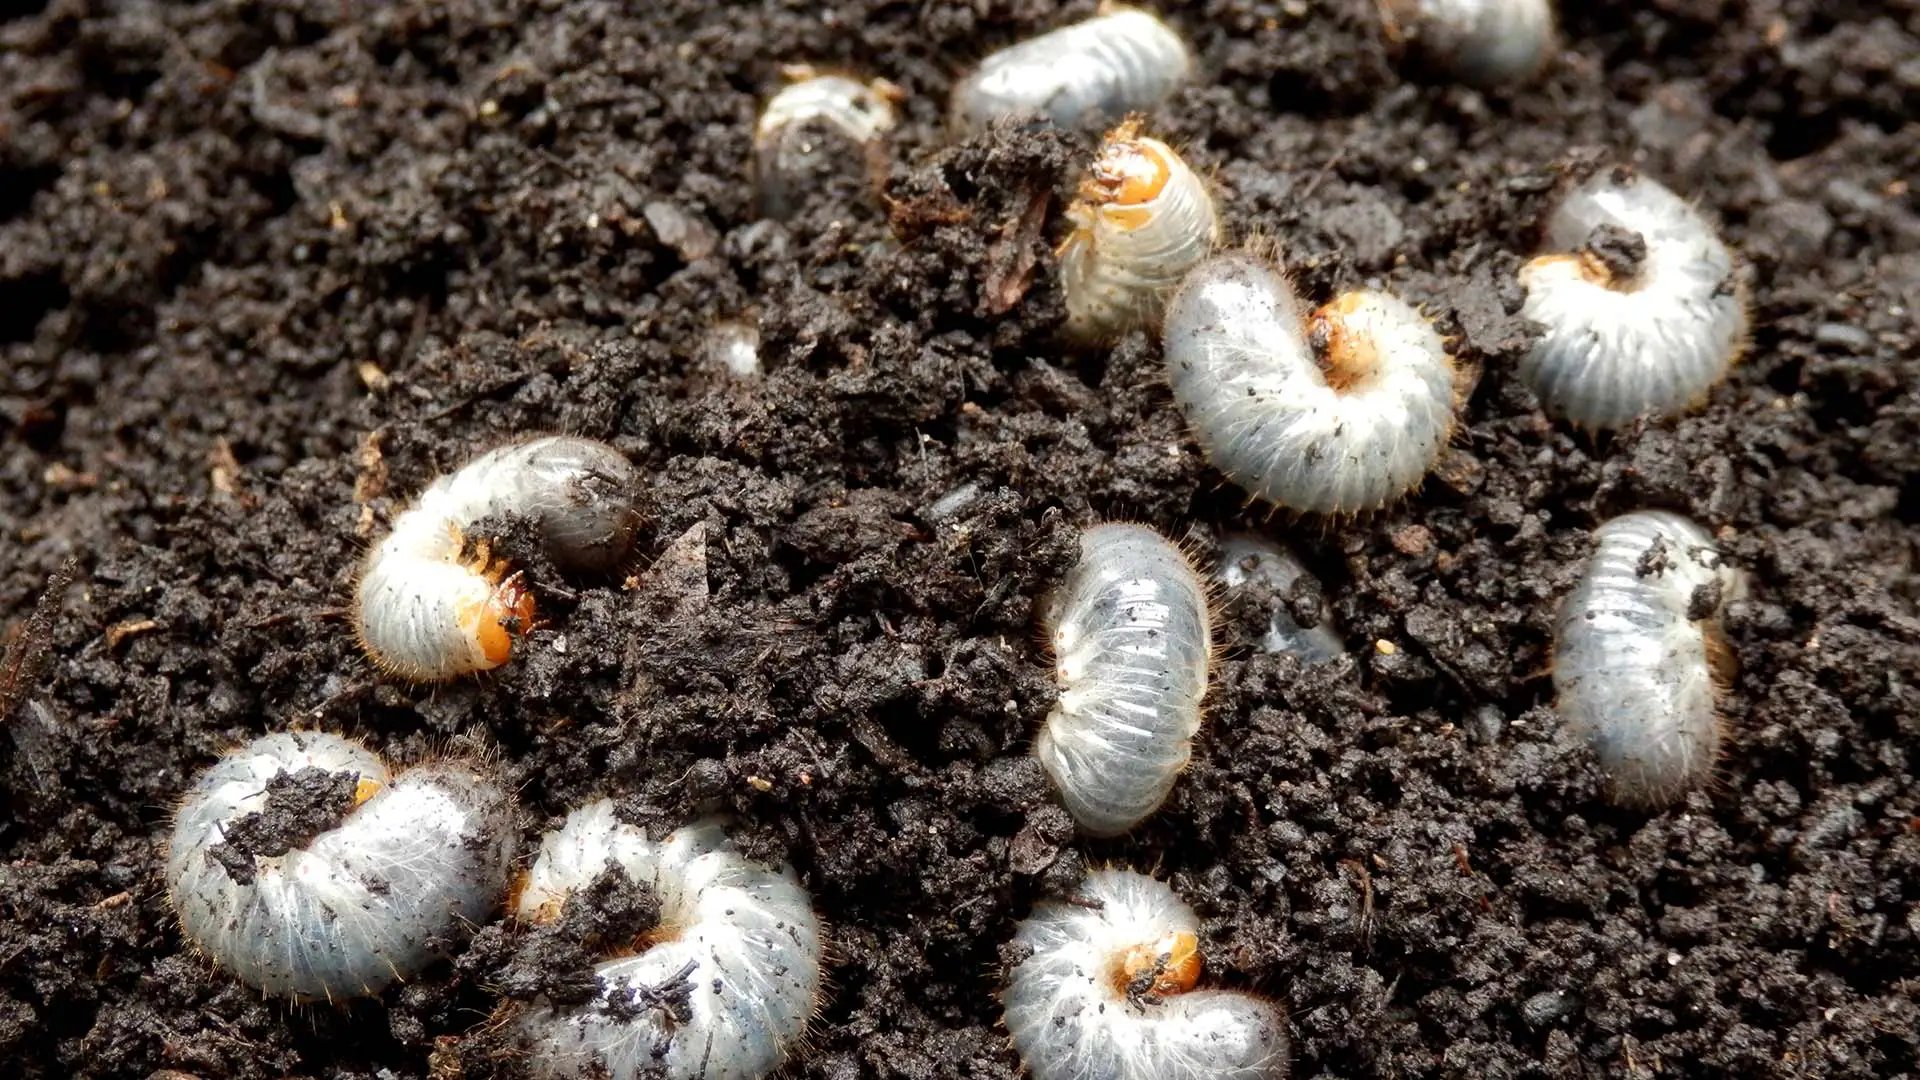 Group of grubs in the dirt crawling and causing damage near Madison, OH.